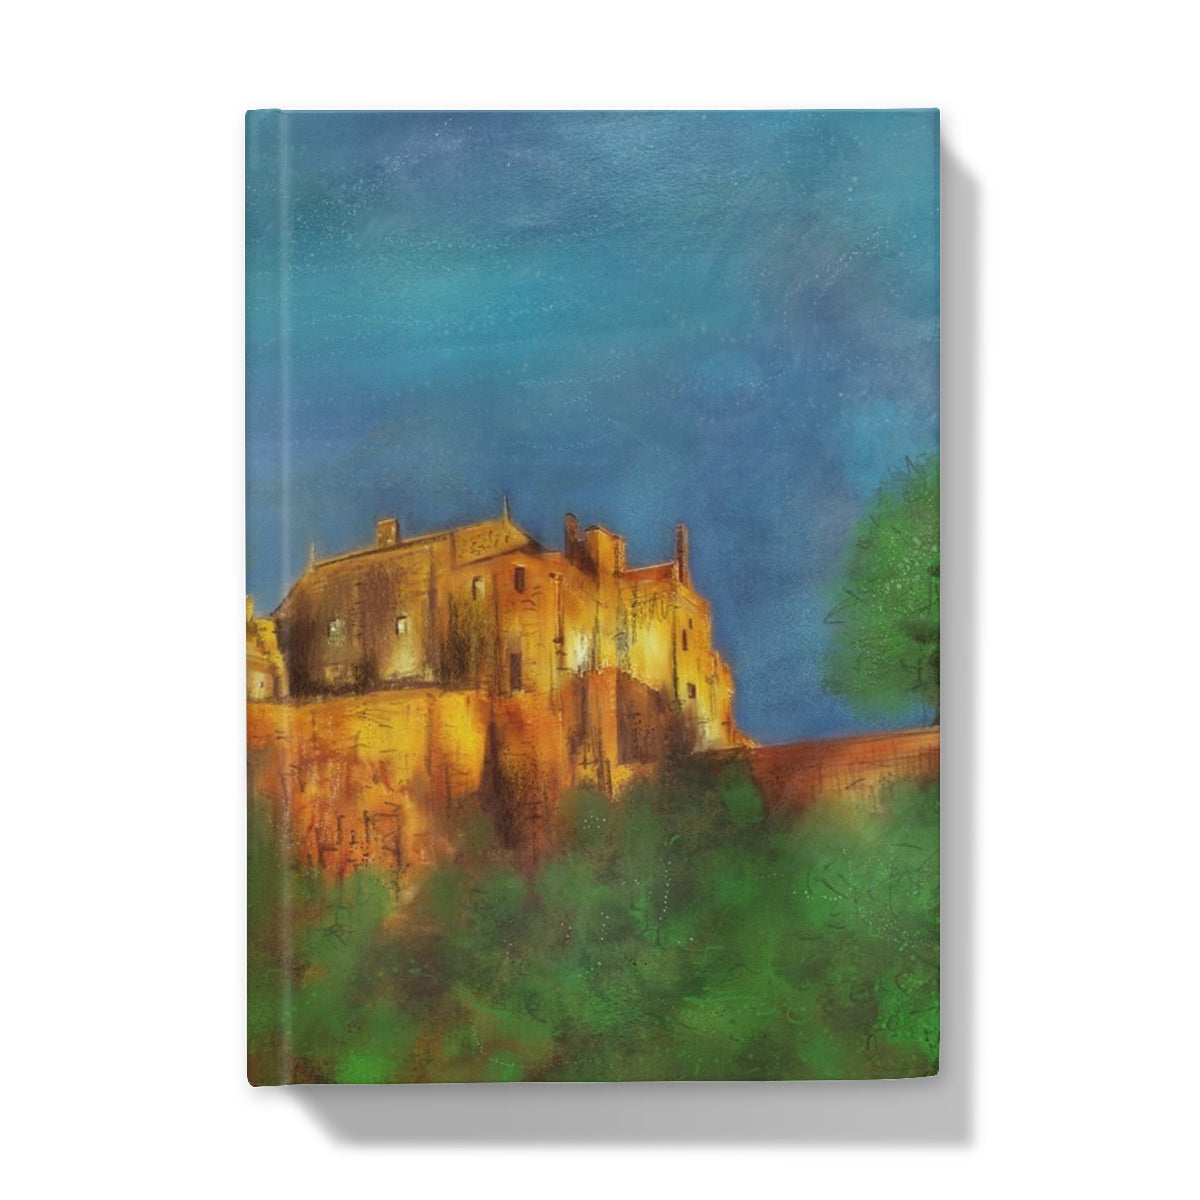 Stirling Castle Art Gifts Hardback Journal-Journals & Notebooks-Historic & Iconic Scotland Art Gallery-5"x7"-Plain-Paintings, Prints, Homeware, Art Gifts From Scotland By Scottish Artist Kevin Hunter